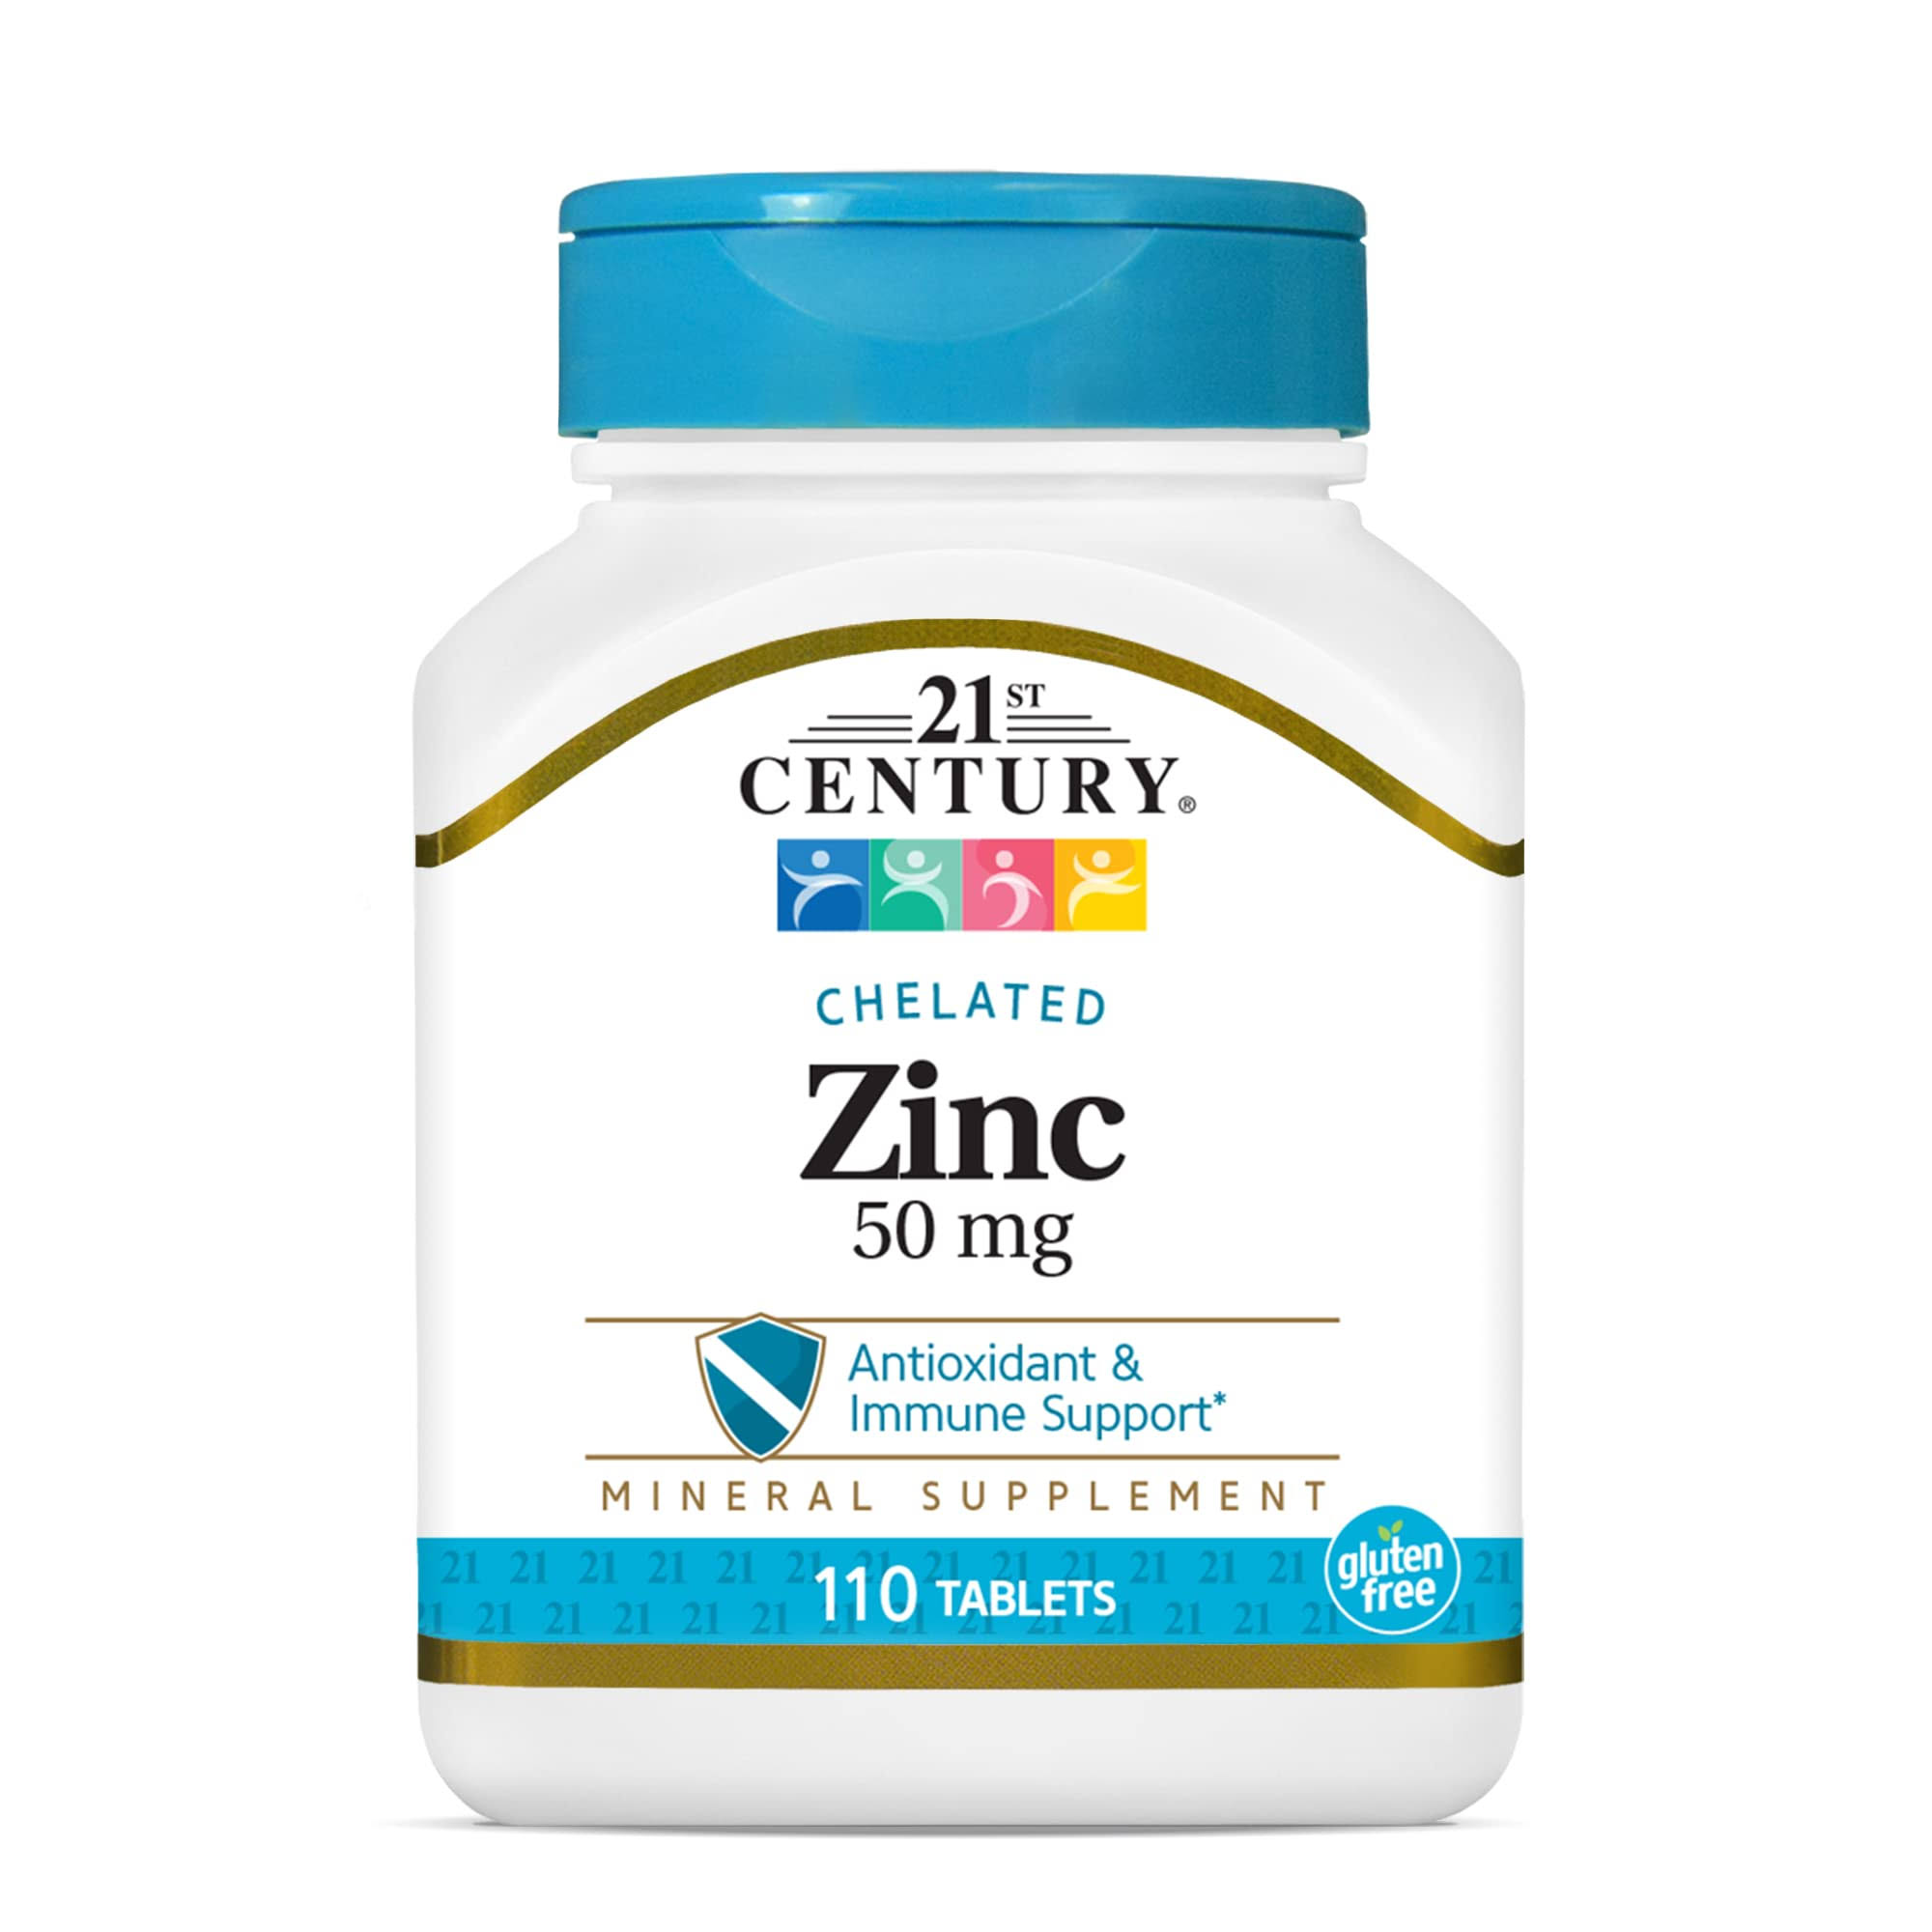 21st Century Chelated Zinc Supplement - 50mg, 110tabs